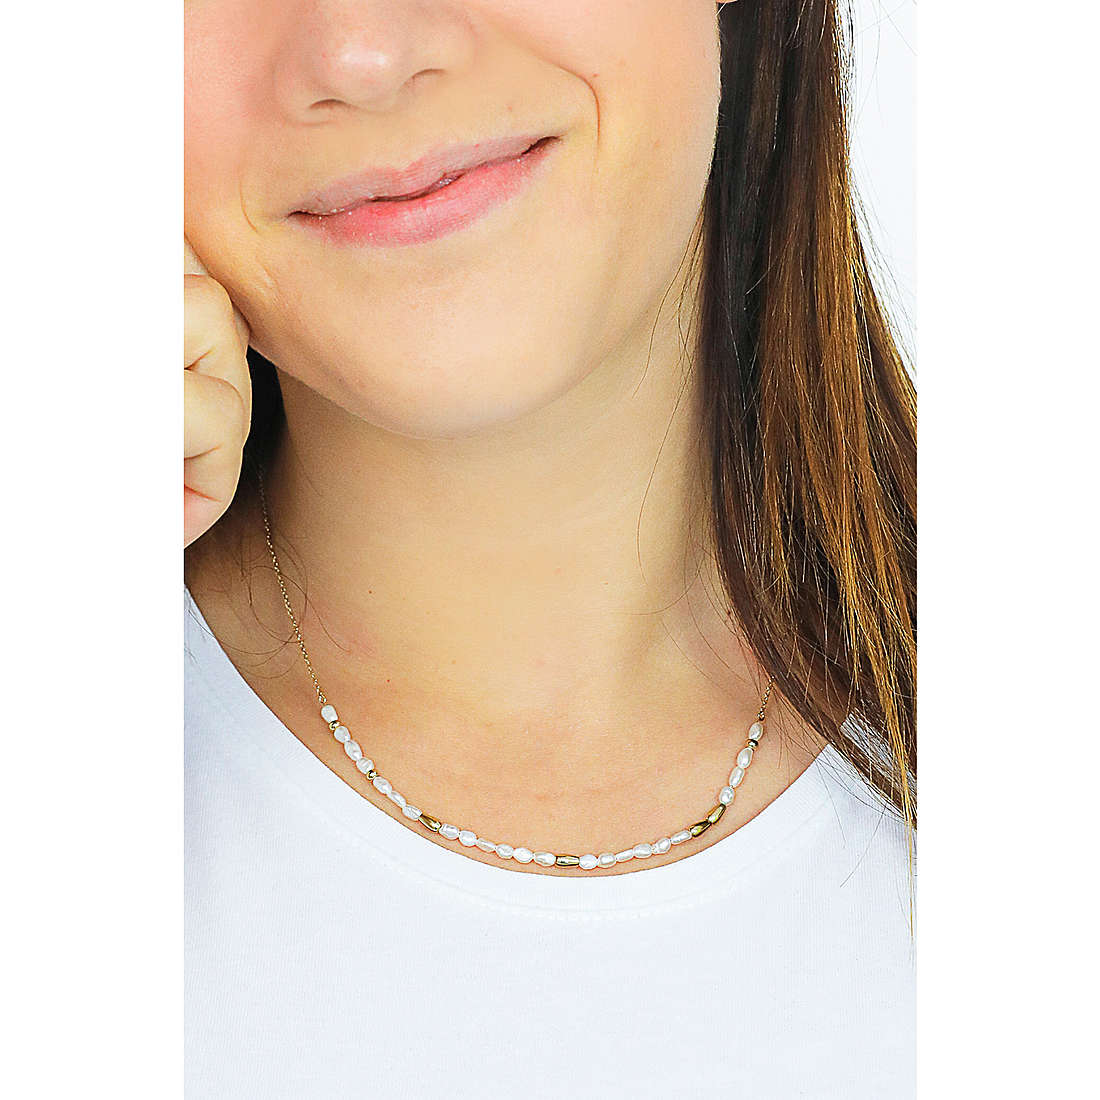 Fossil necklaces Drew woman JF03808710 wearing